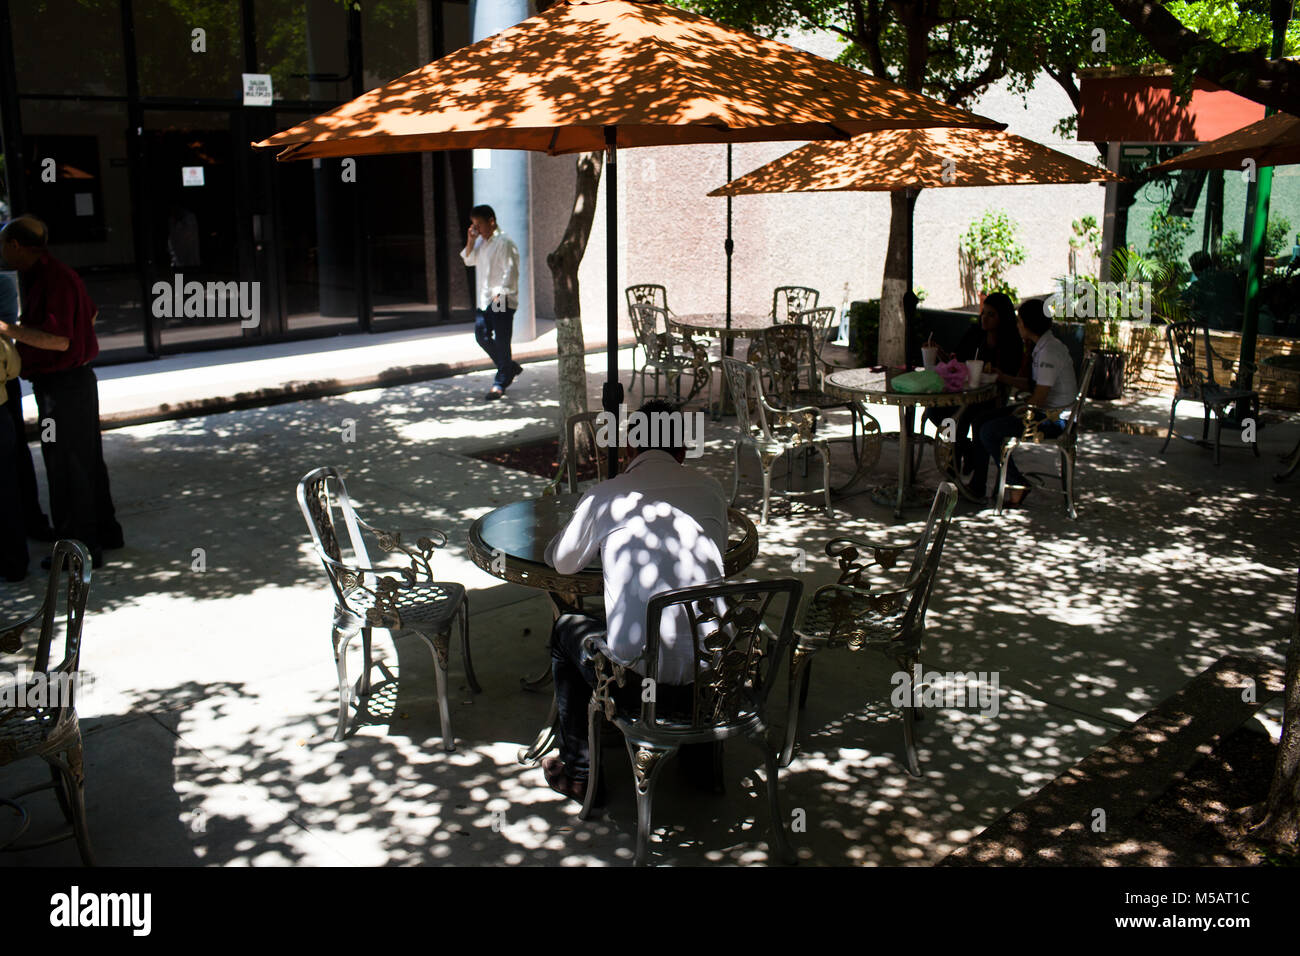 A patio outside the Sinaloa State Congress in Culiac‡n, Sinaloa, Mexico on Thursday, July 16, 2015. Sinaloa is the Mexican state where the notorious drug cartel leader Joaqu’n 'El Chapo' Guzm‡n is from. Guzm‡n recently escaped from a maximum security Mexican prison for the second time. Stock Photo